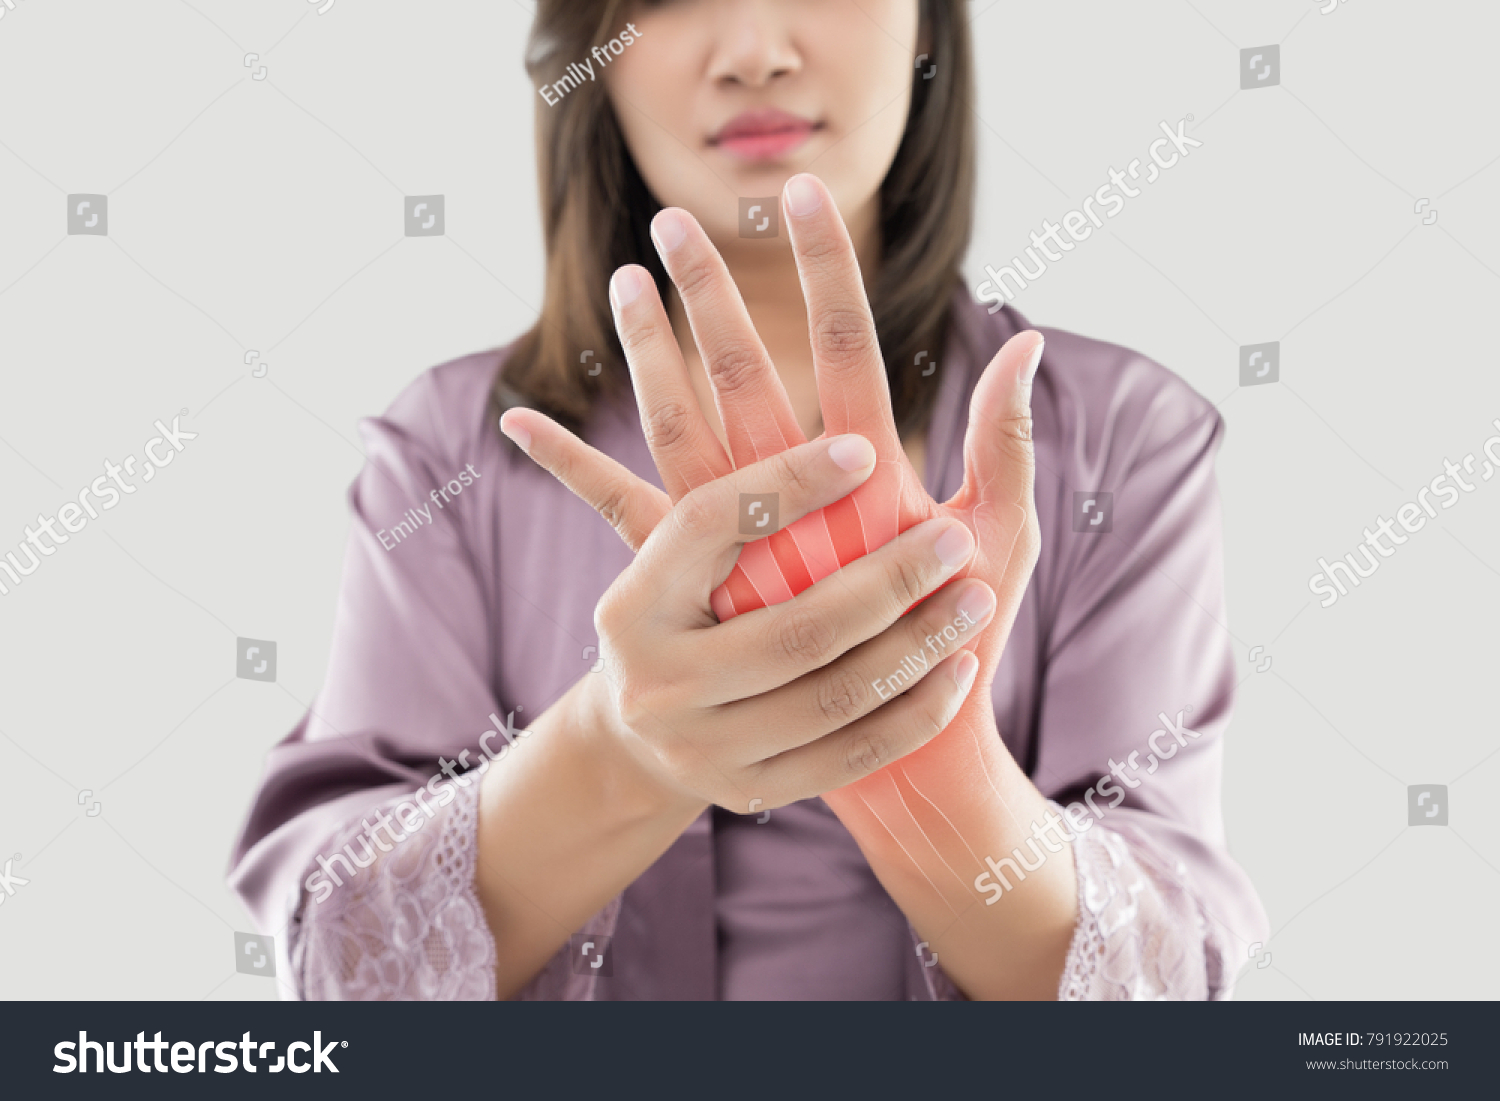 Asian woman suffering from pain in bone against gray background, Concept with hand arthritis grimace in pain #791922025